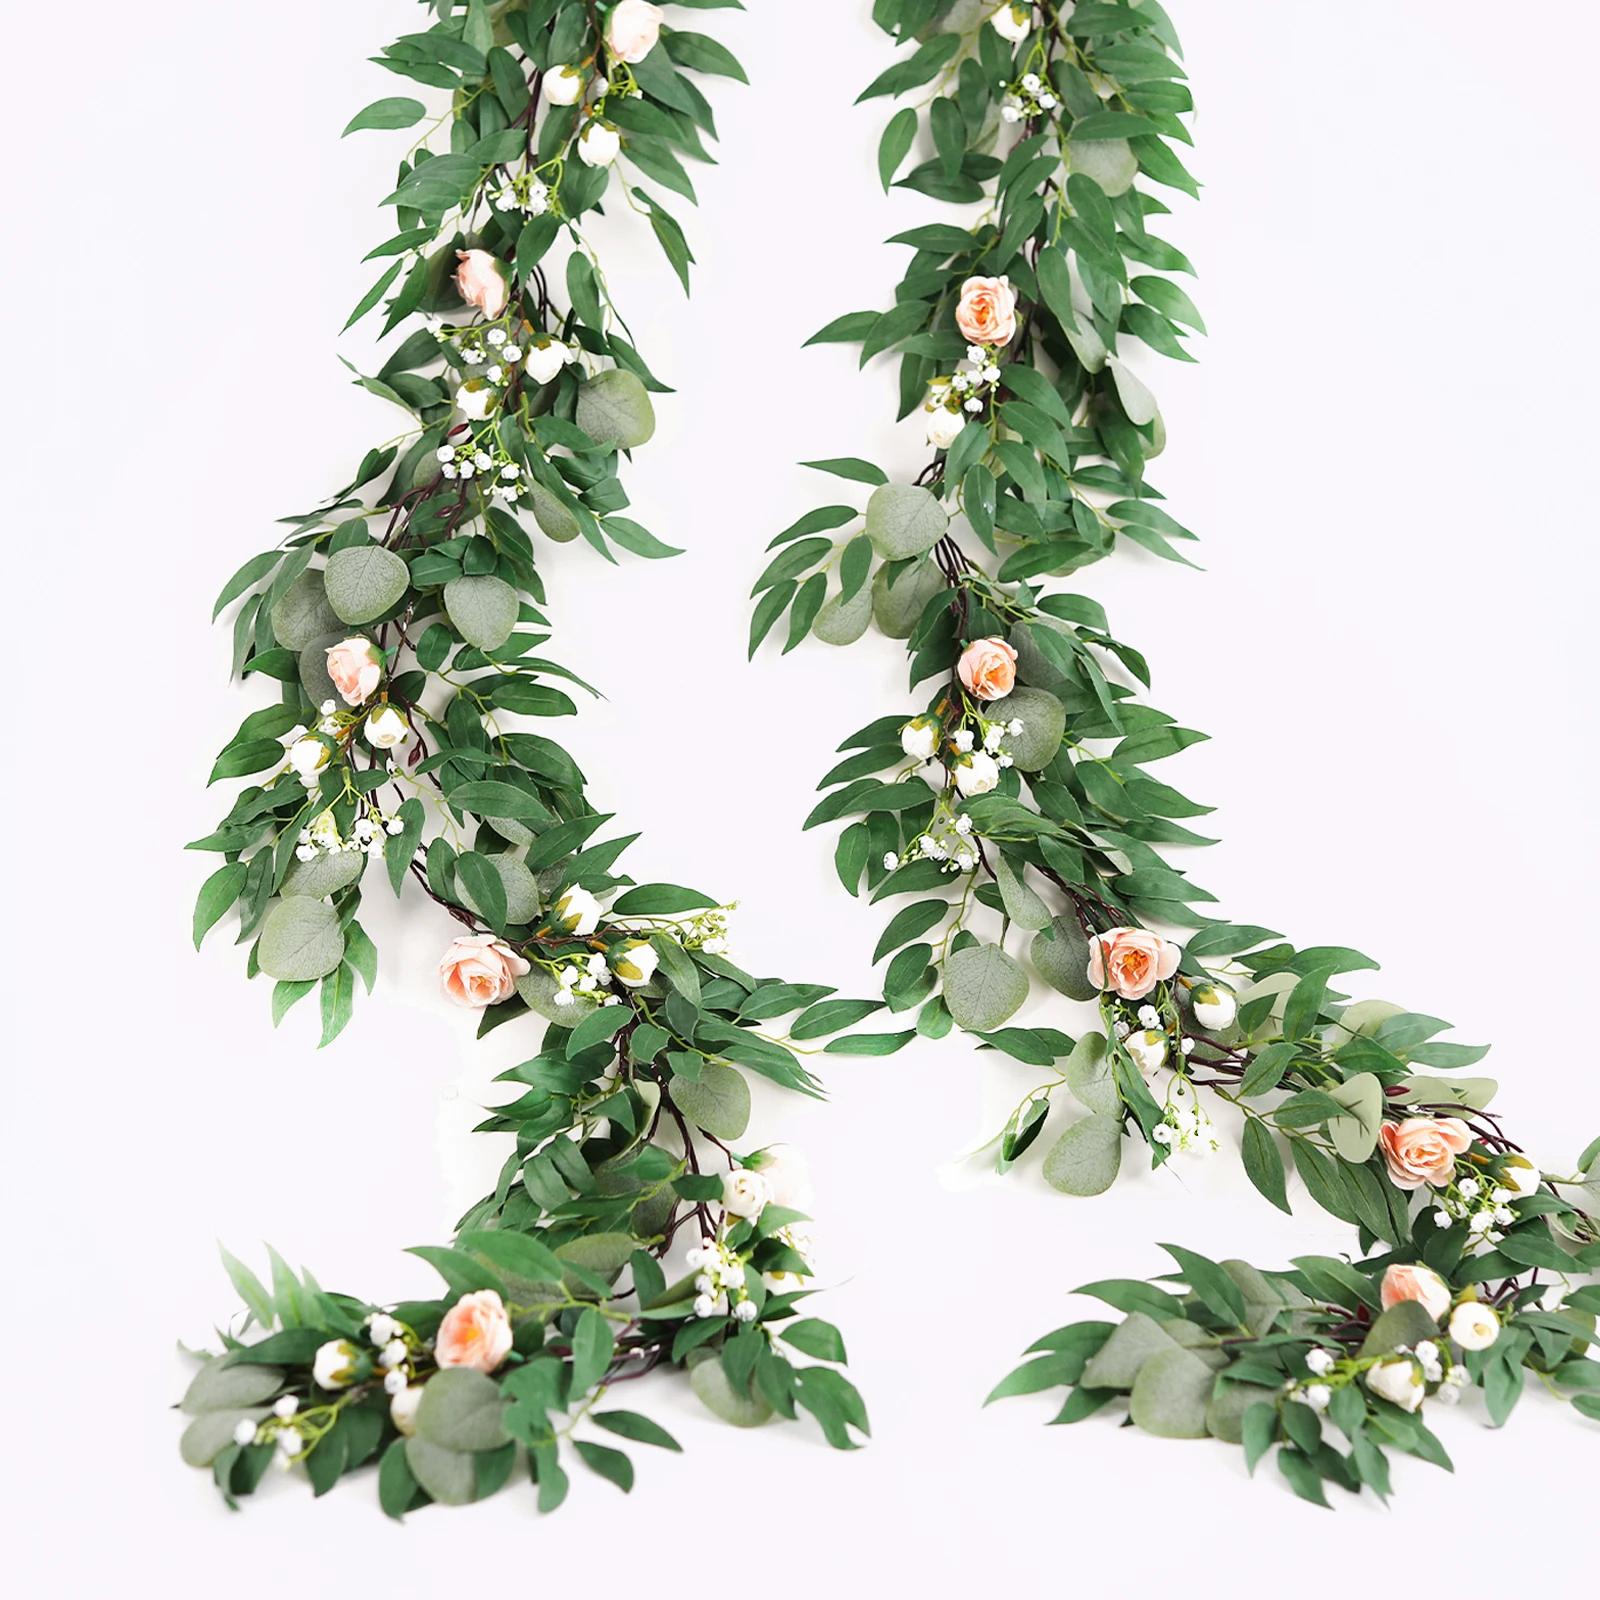 

PARTY JOY Eucalyptus Willow Leaves Vines Artificial Flowers Rose Garland for Wedding Arch Greenery Backdrop Doorways Table Decor